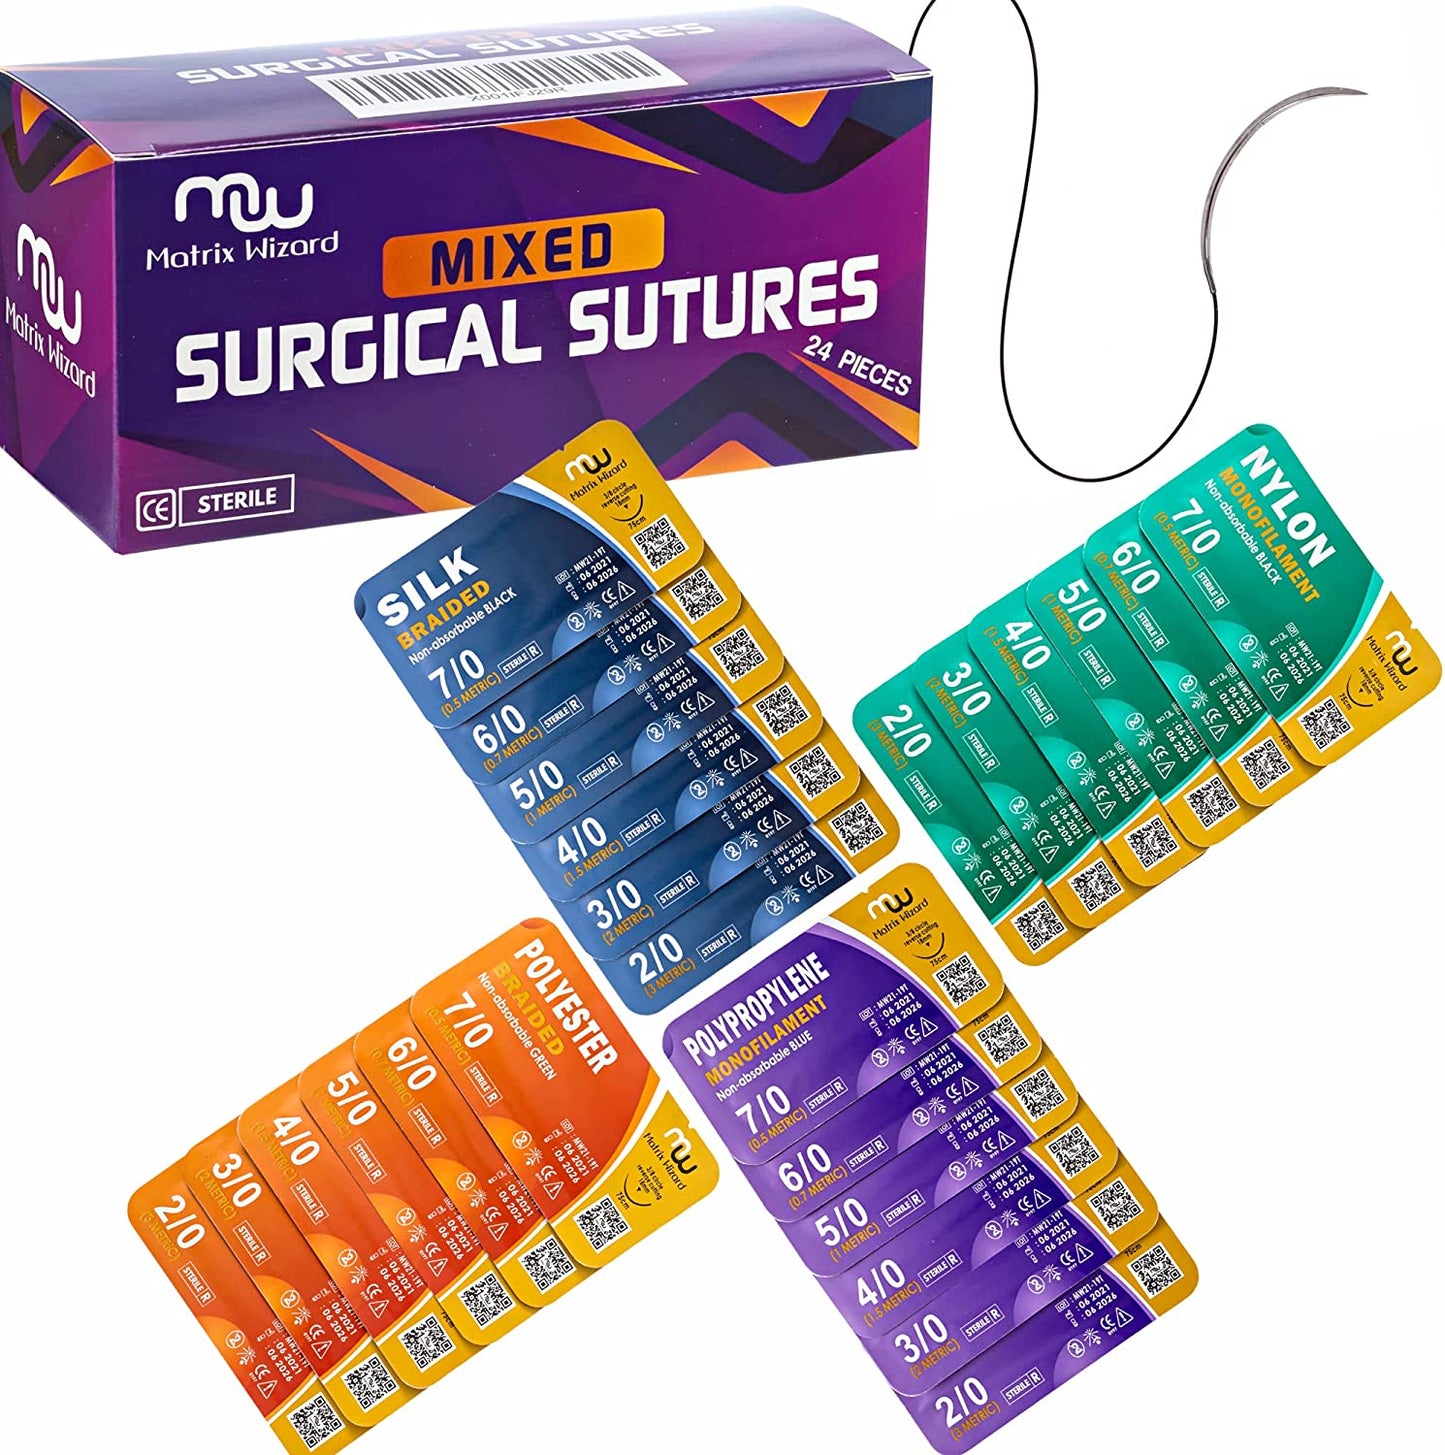 Mixed Sutures Thread with Needle - 24Pk Sterile Nylon, Polyester, Silk, Polypropylene: 2-0, 3-0, 4-0, 5-0, 6-0, 7-0: Practicing Suturing Skills; Student's Hospital ER Training; First Aid Demo; Vet Use